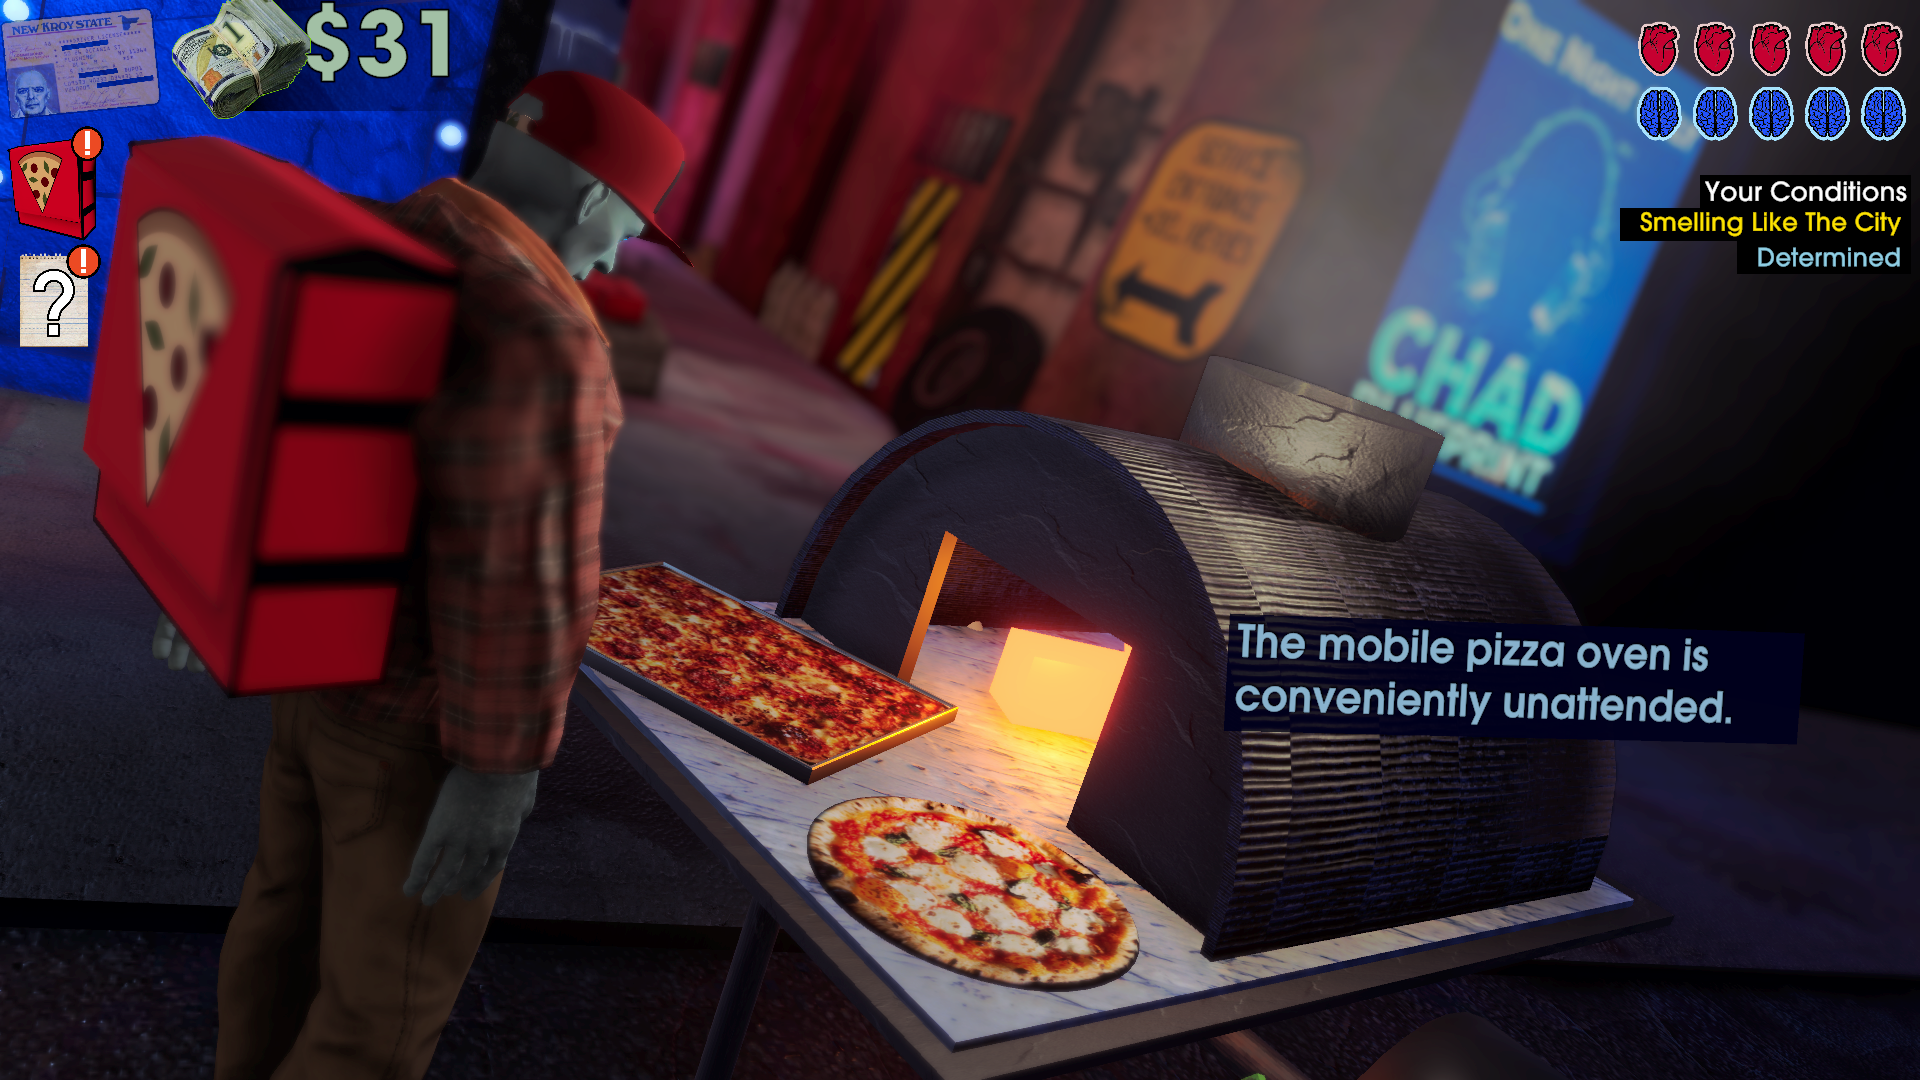 Screenshot of the player character finding an unattended mobile pizza oven